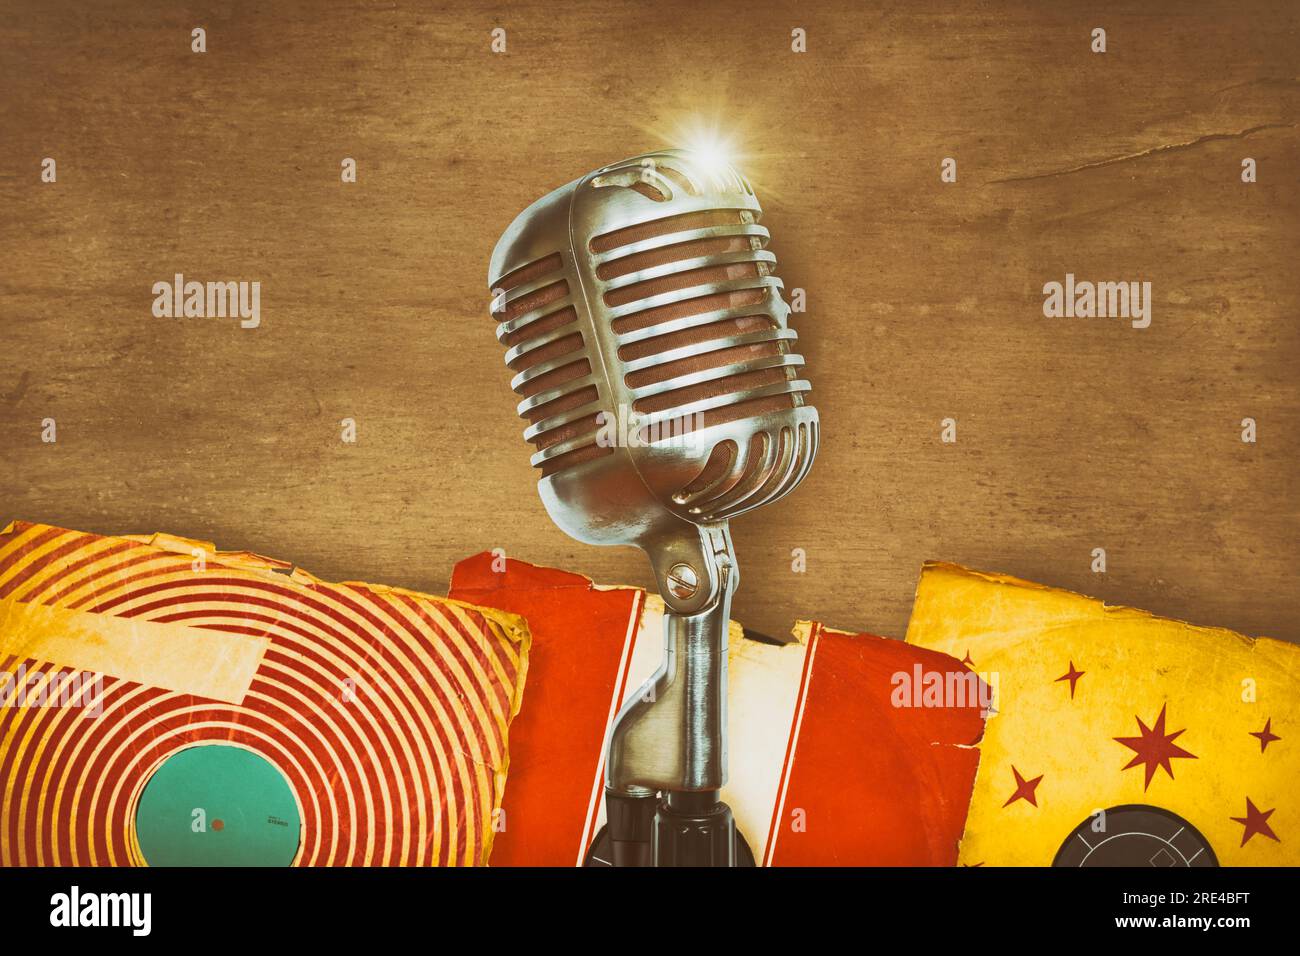 Retro styled image of an authentic vintage microphone with old record albums Stock Photo